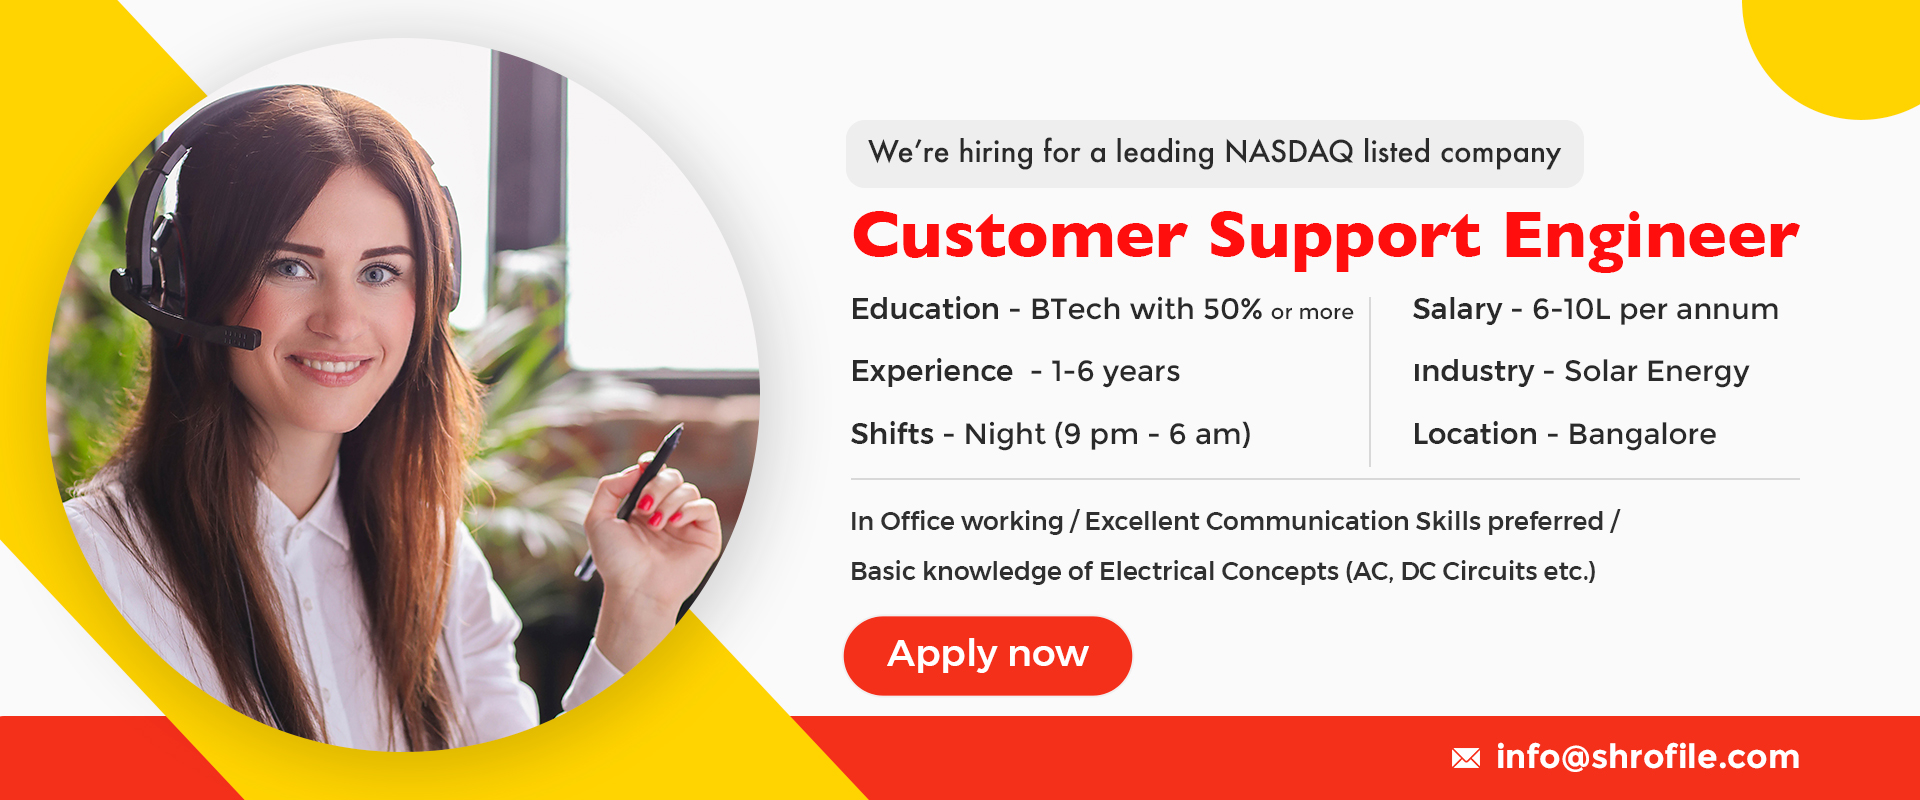 We’re hiring for a leading NASDAQ listed company 'Customer Support Engineer' 5-days working